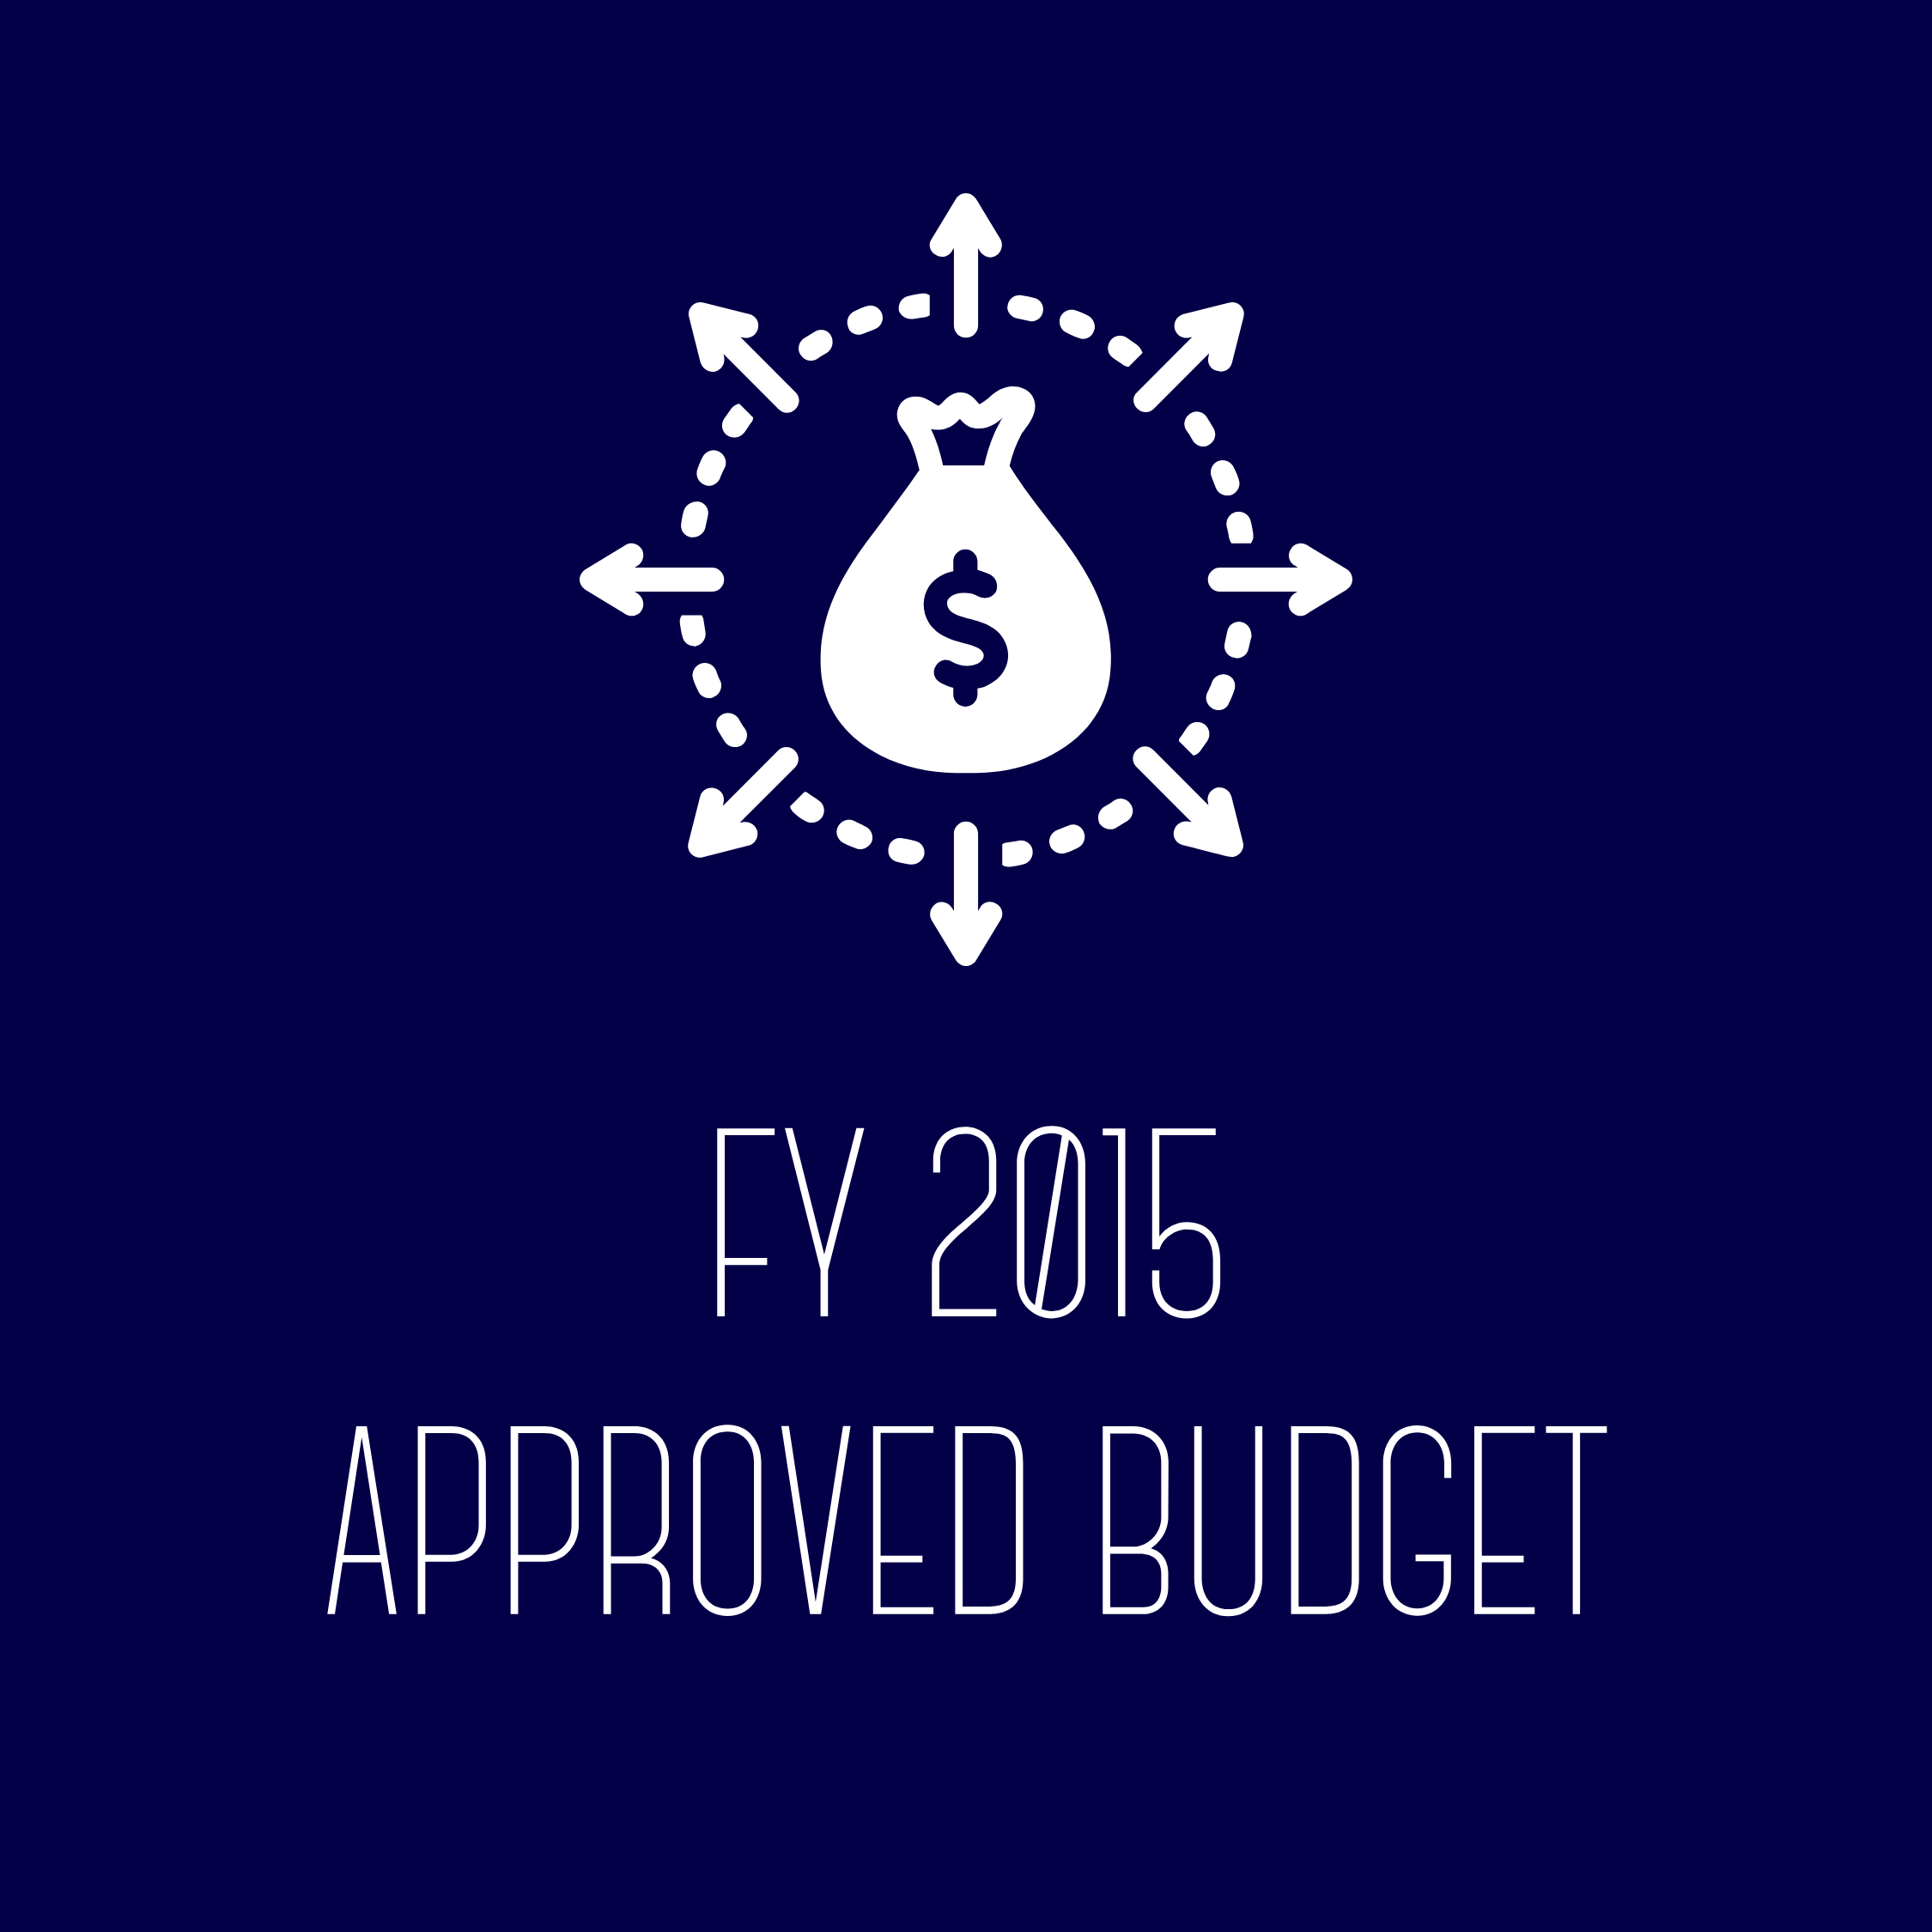 FY 2015 Approved Budget